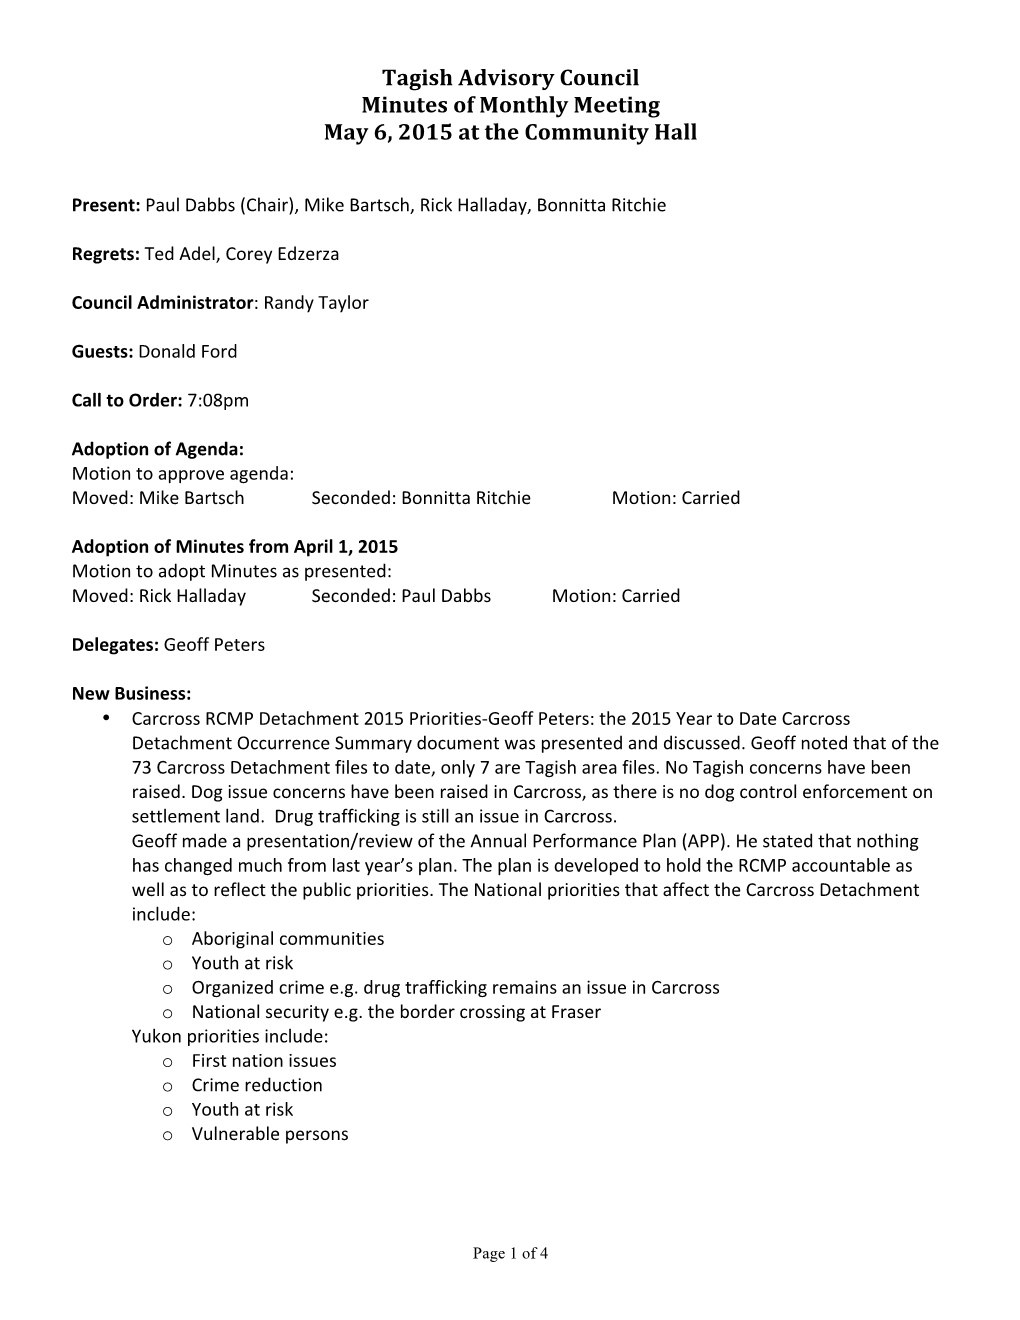 Tagish Advisory Council Minutes of Monthly Meeting May 6, 2015 at the Community Hall